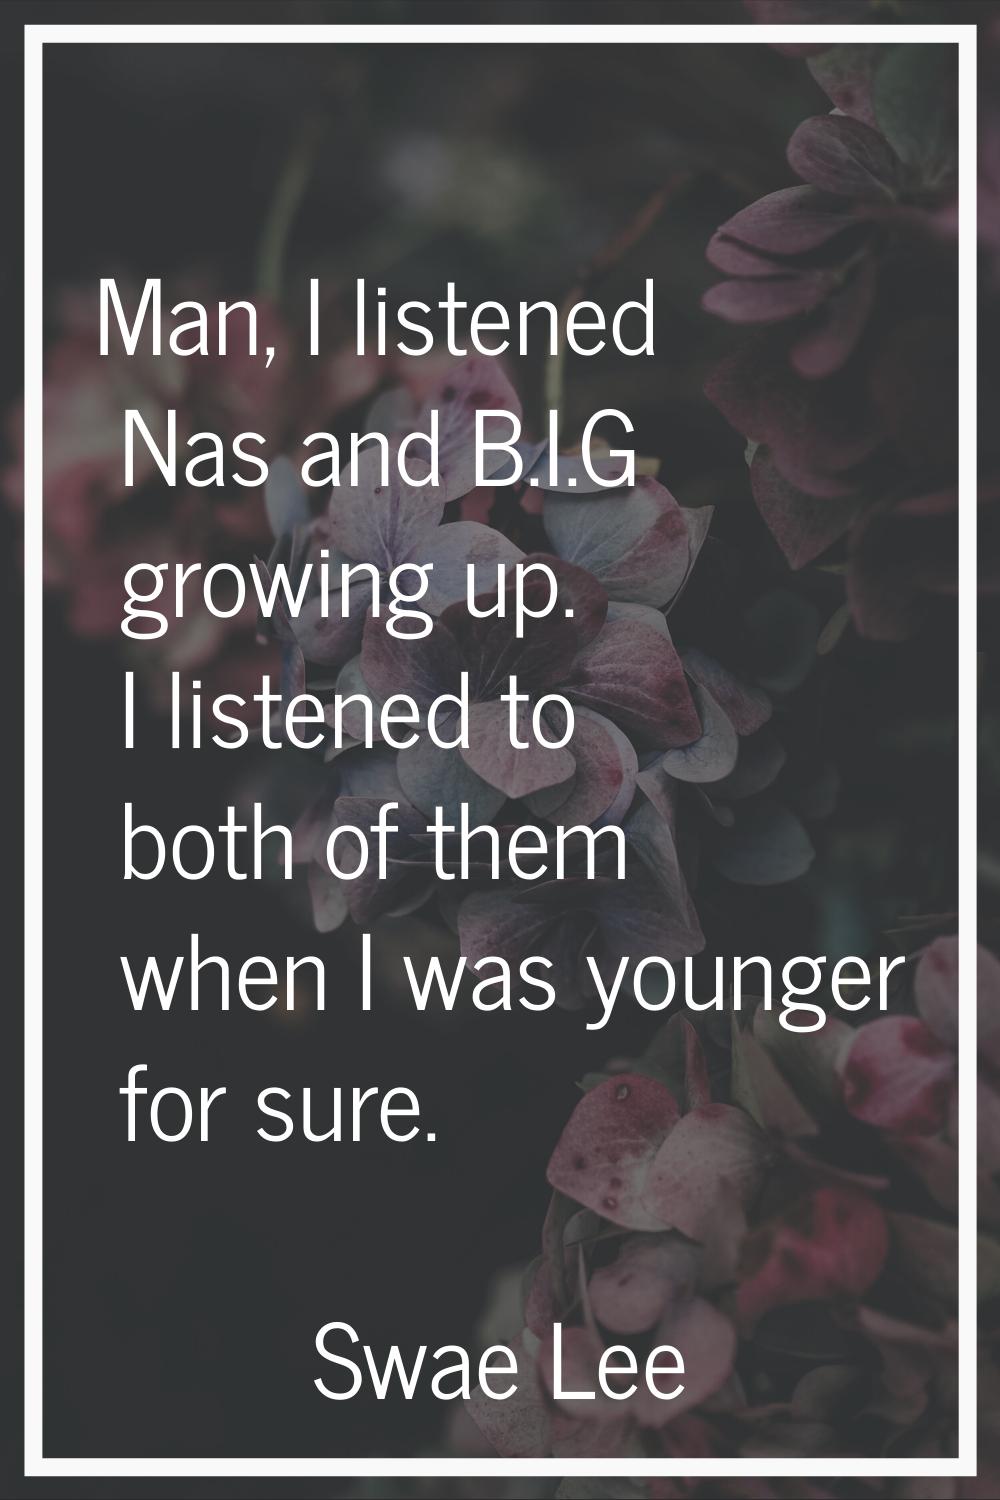 Man, I listened Nas and B.I.G growing up. I listened to both of them when I was younger for sure.